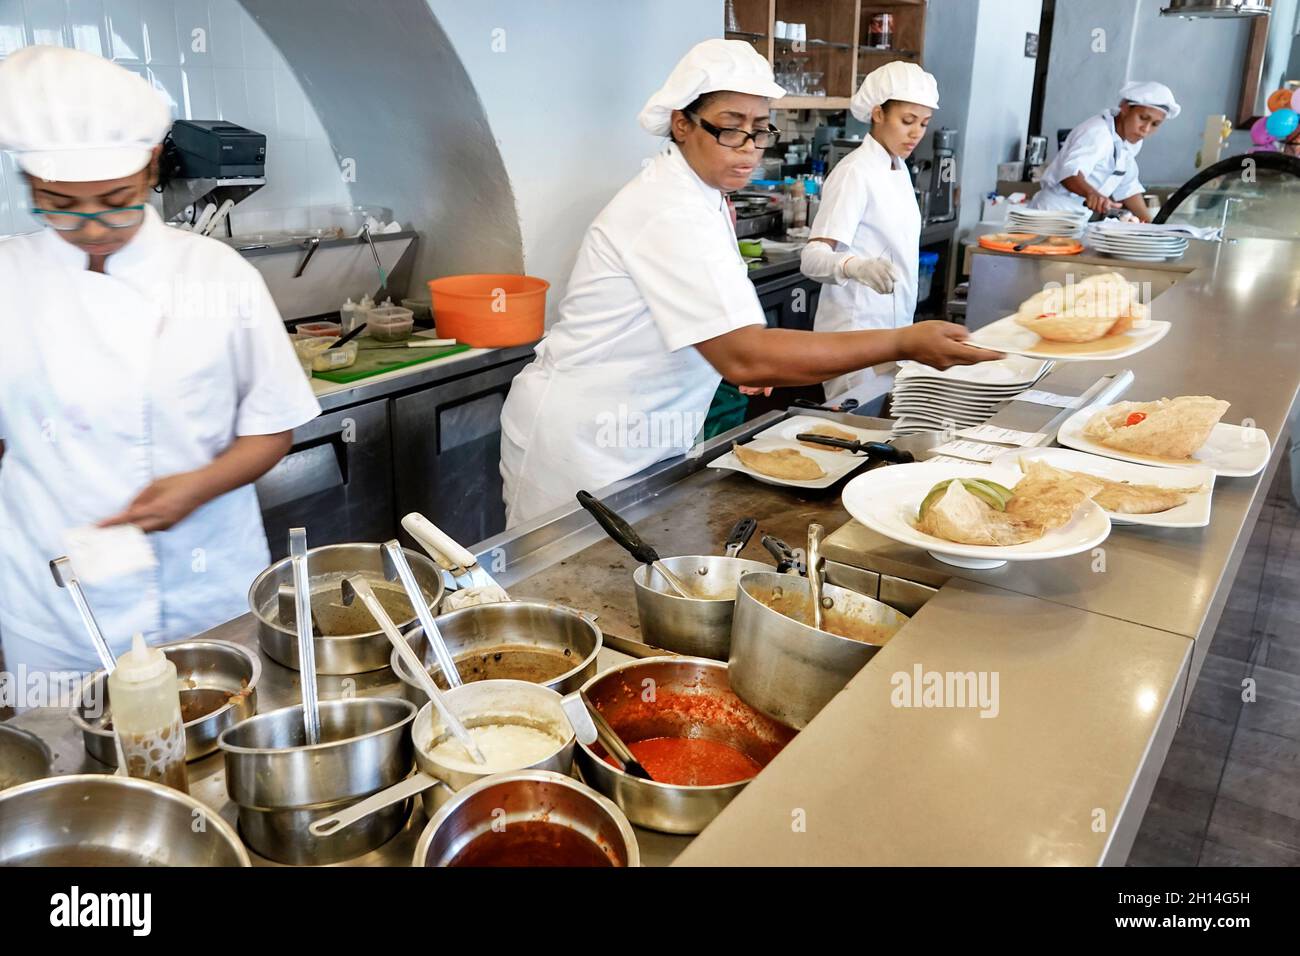 Cartagena Colombia,Crepes & Waffles restaurant,inside interior open kitchen cook chef,Black female women working plating food preparing order Stock Photo